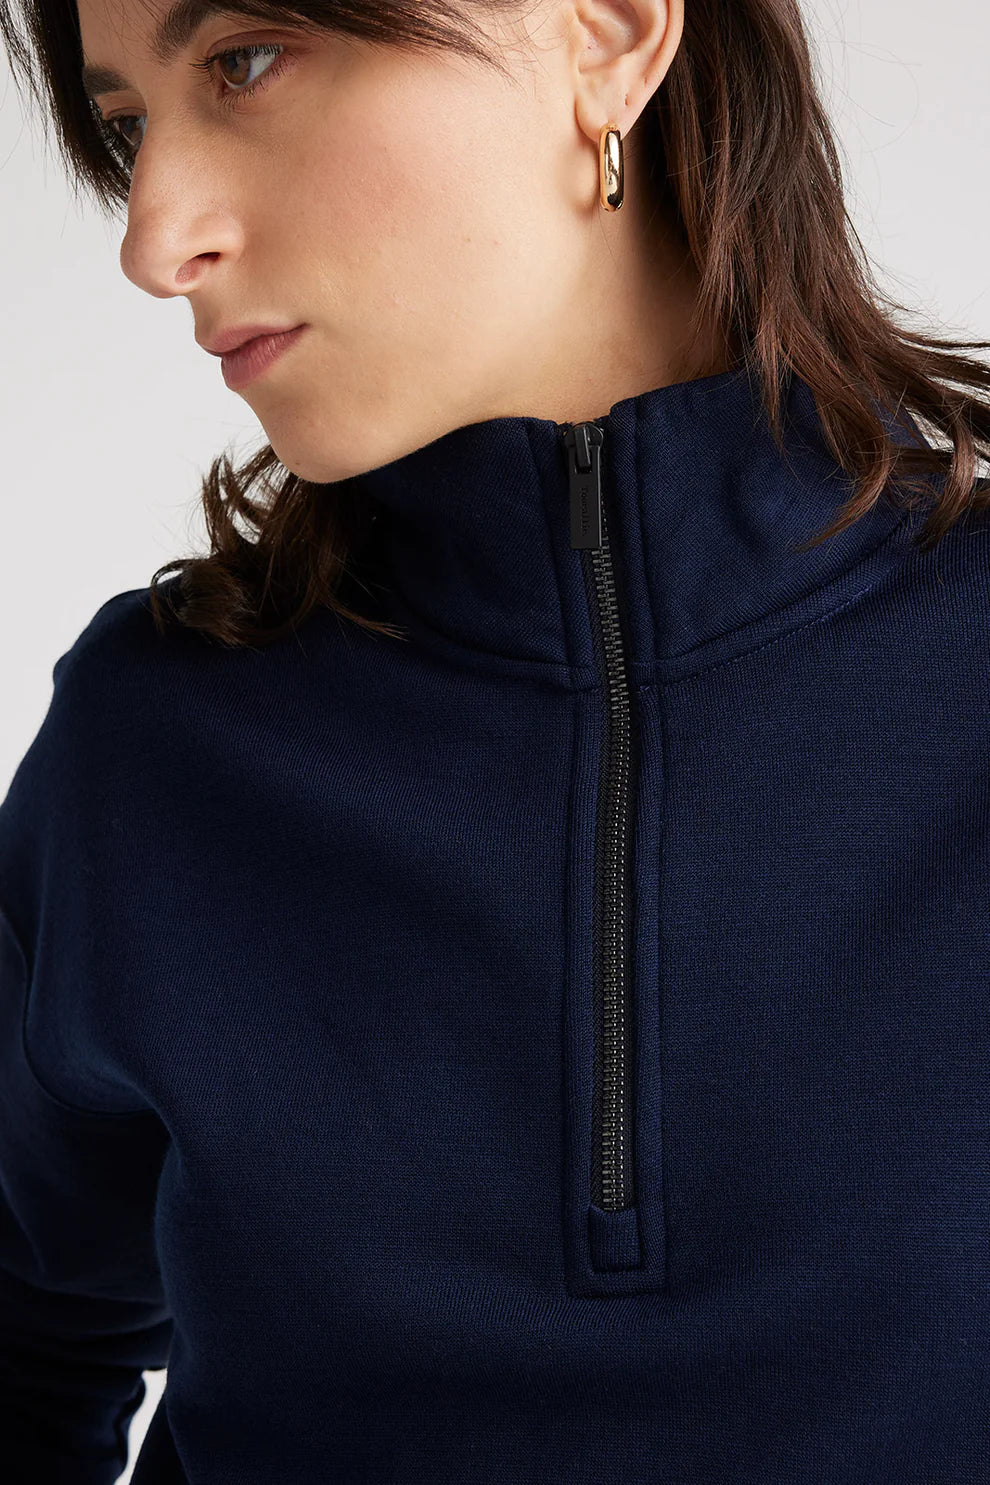 Experience unparalleled comfort in our navy blue Merino wool zip sweater. Perfect blend of style and warmth.